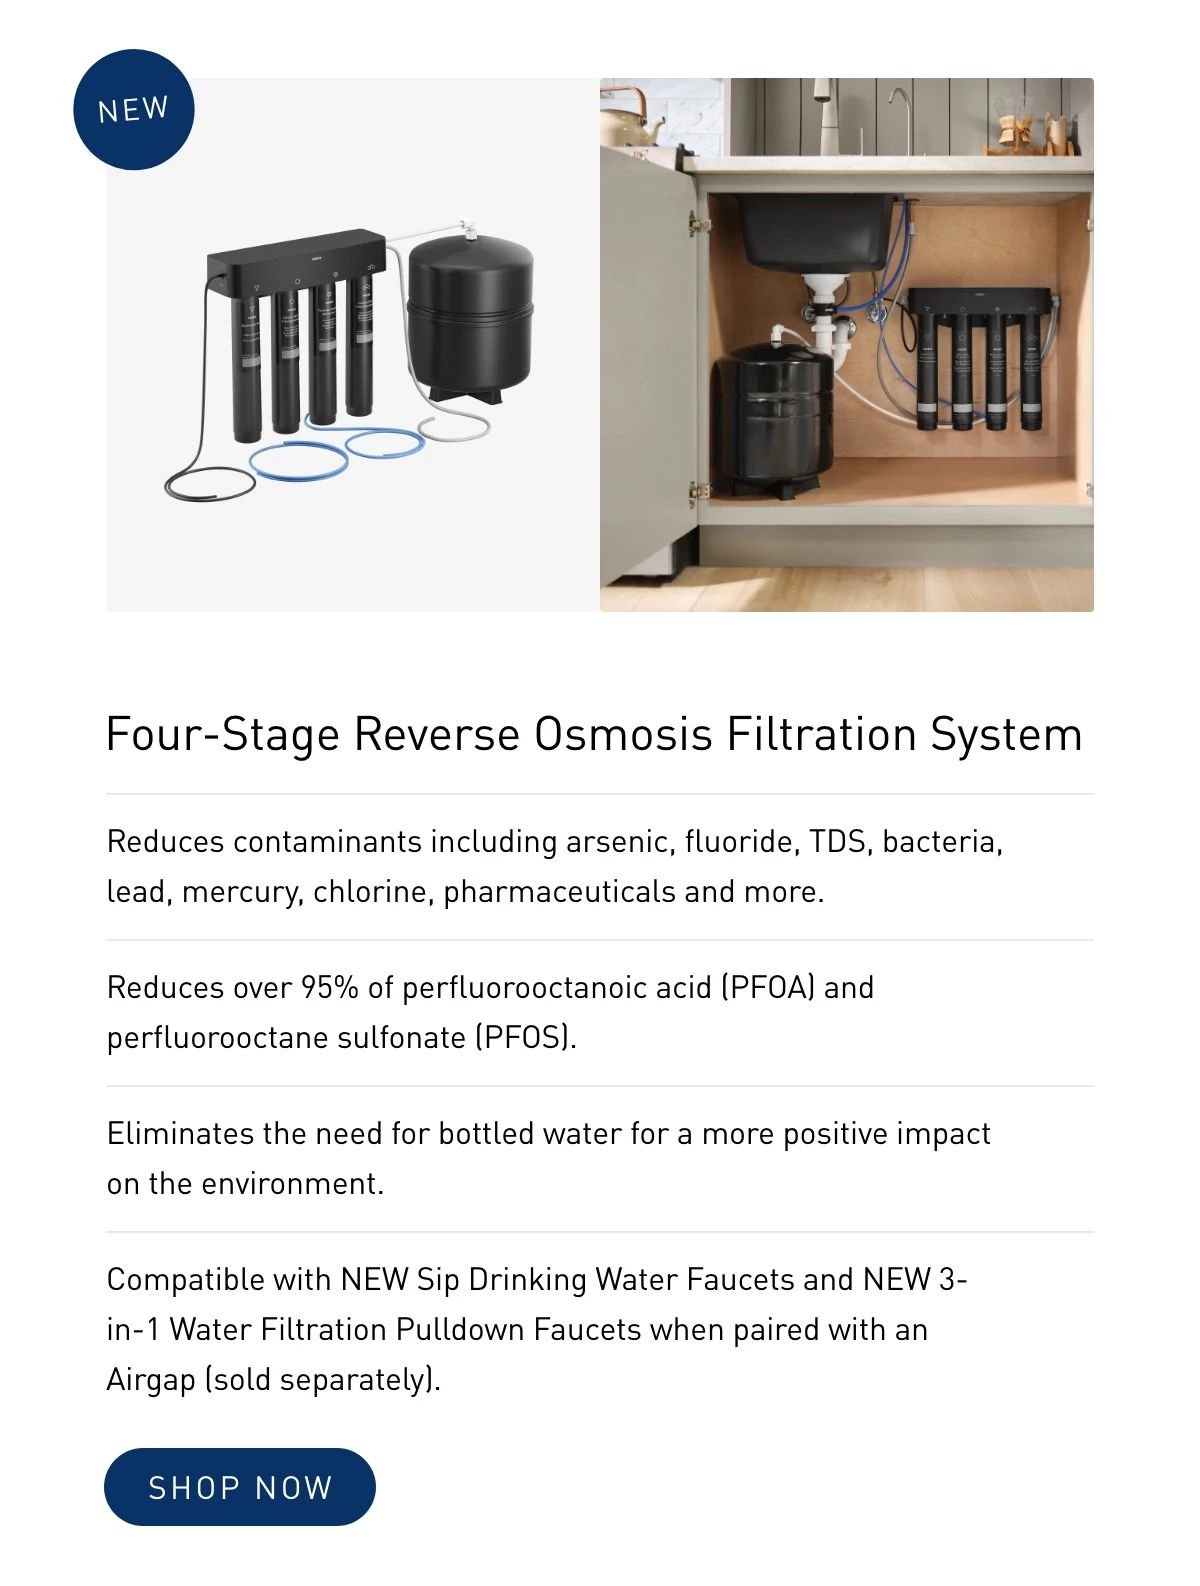 Four-Stage Reverse Osmosis Filtration System